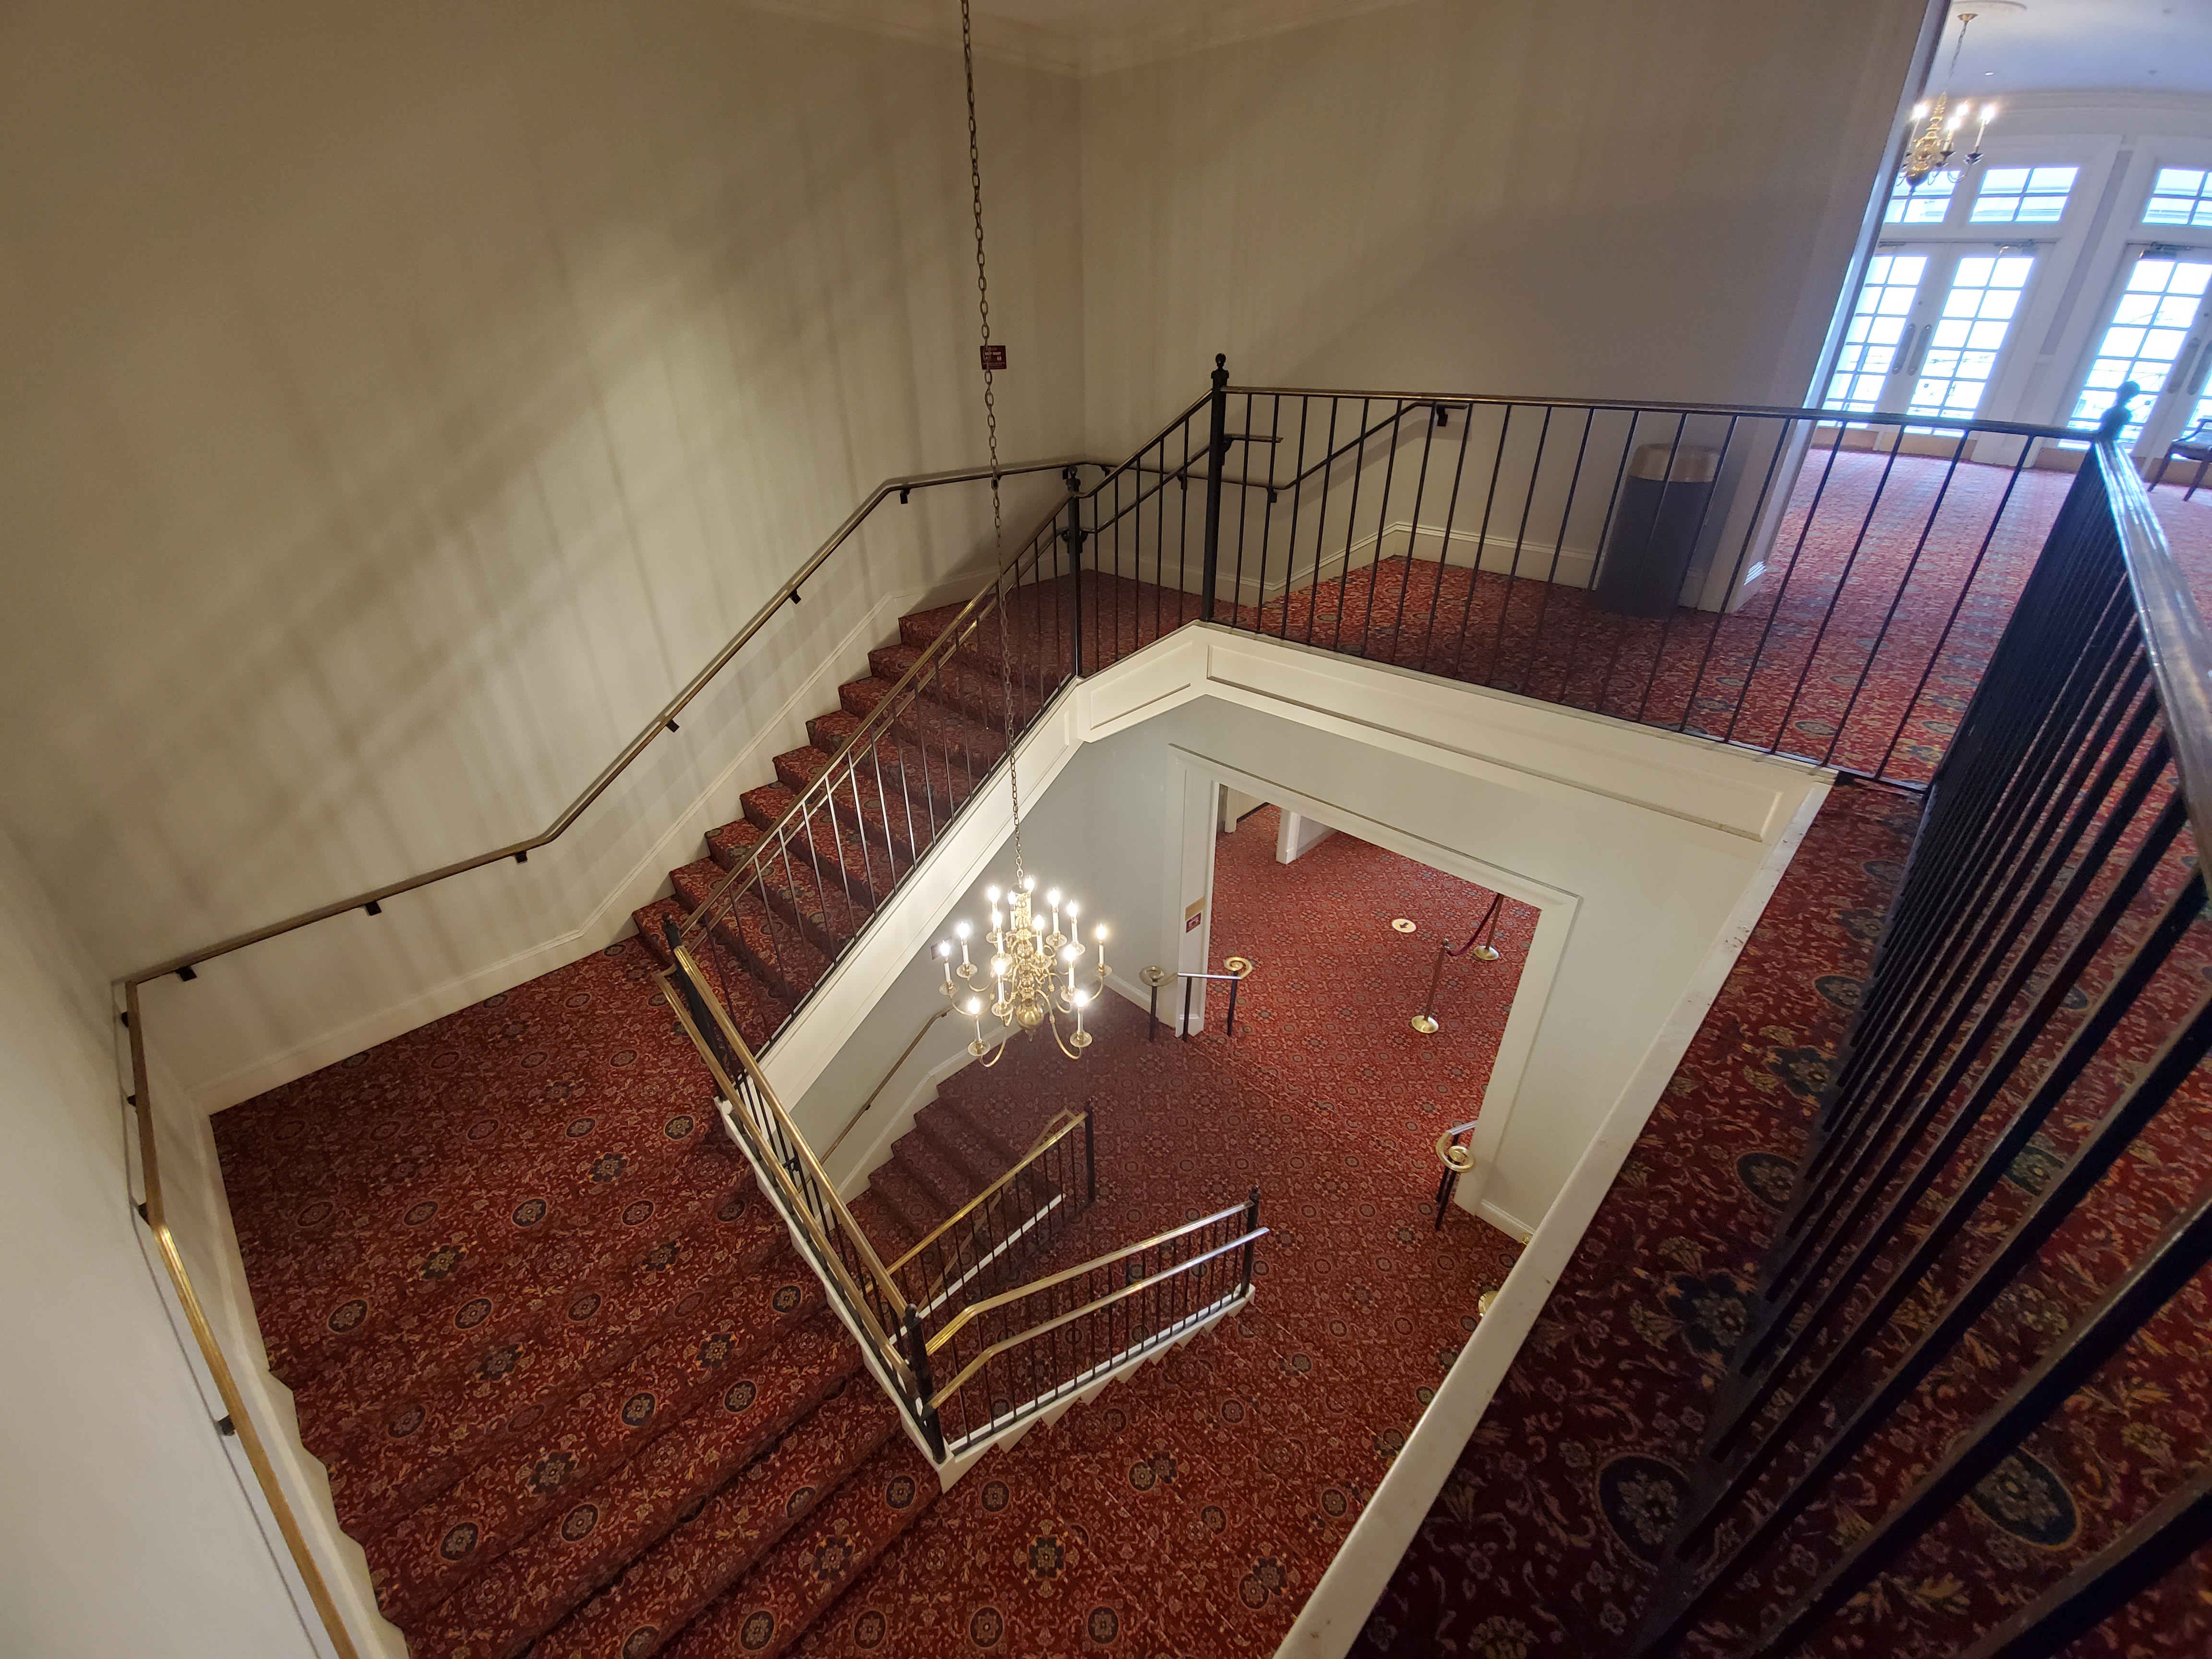 Grand Staircase seen from above